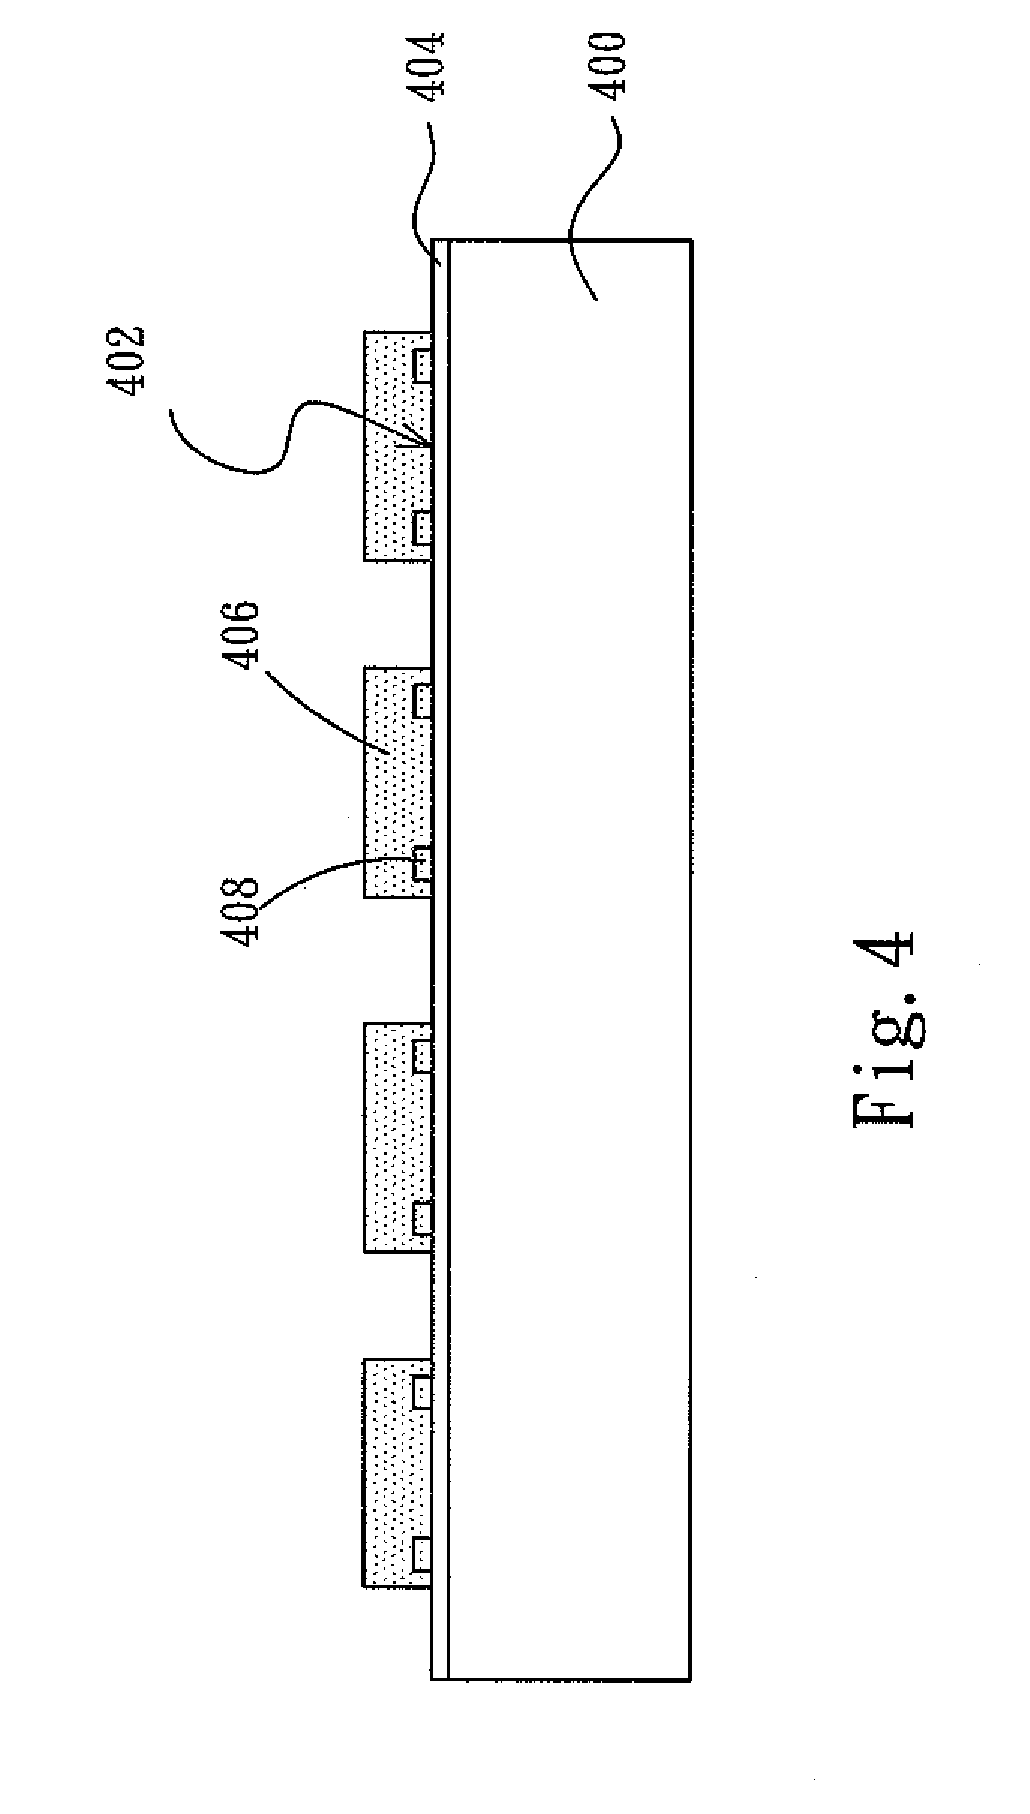 Semiconductor packaging method by using large panel size